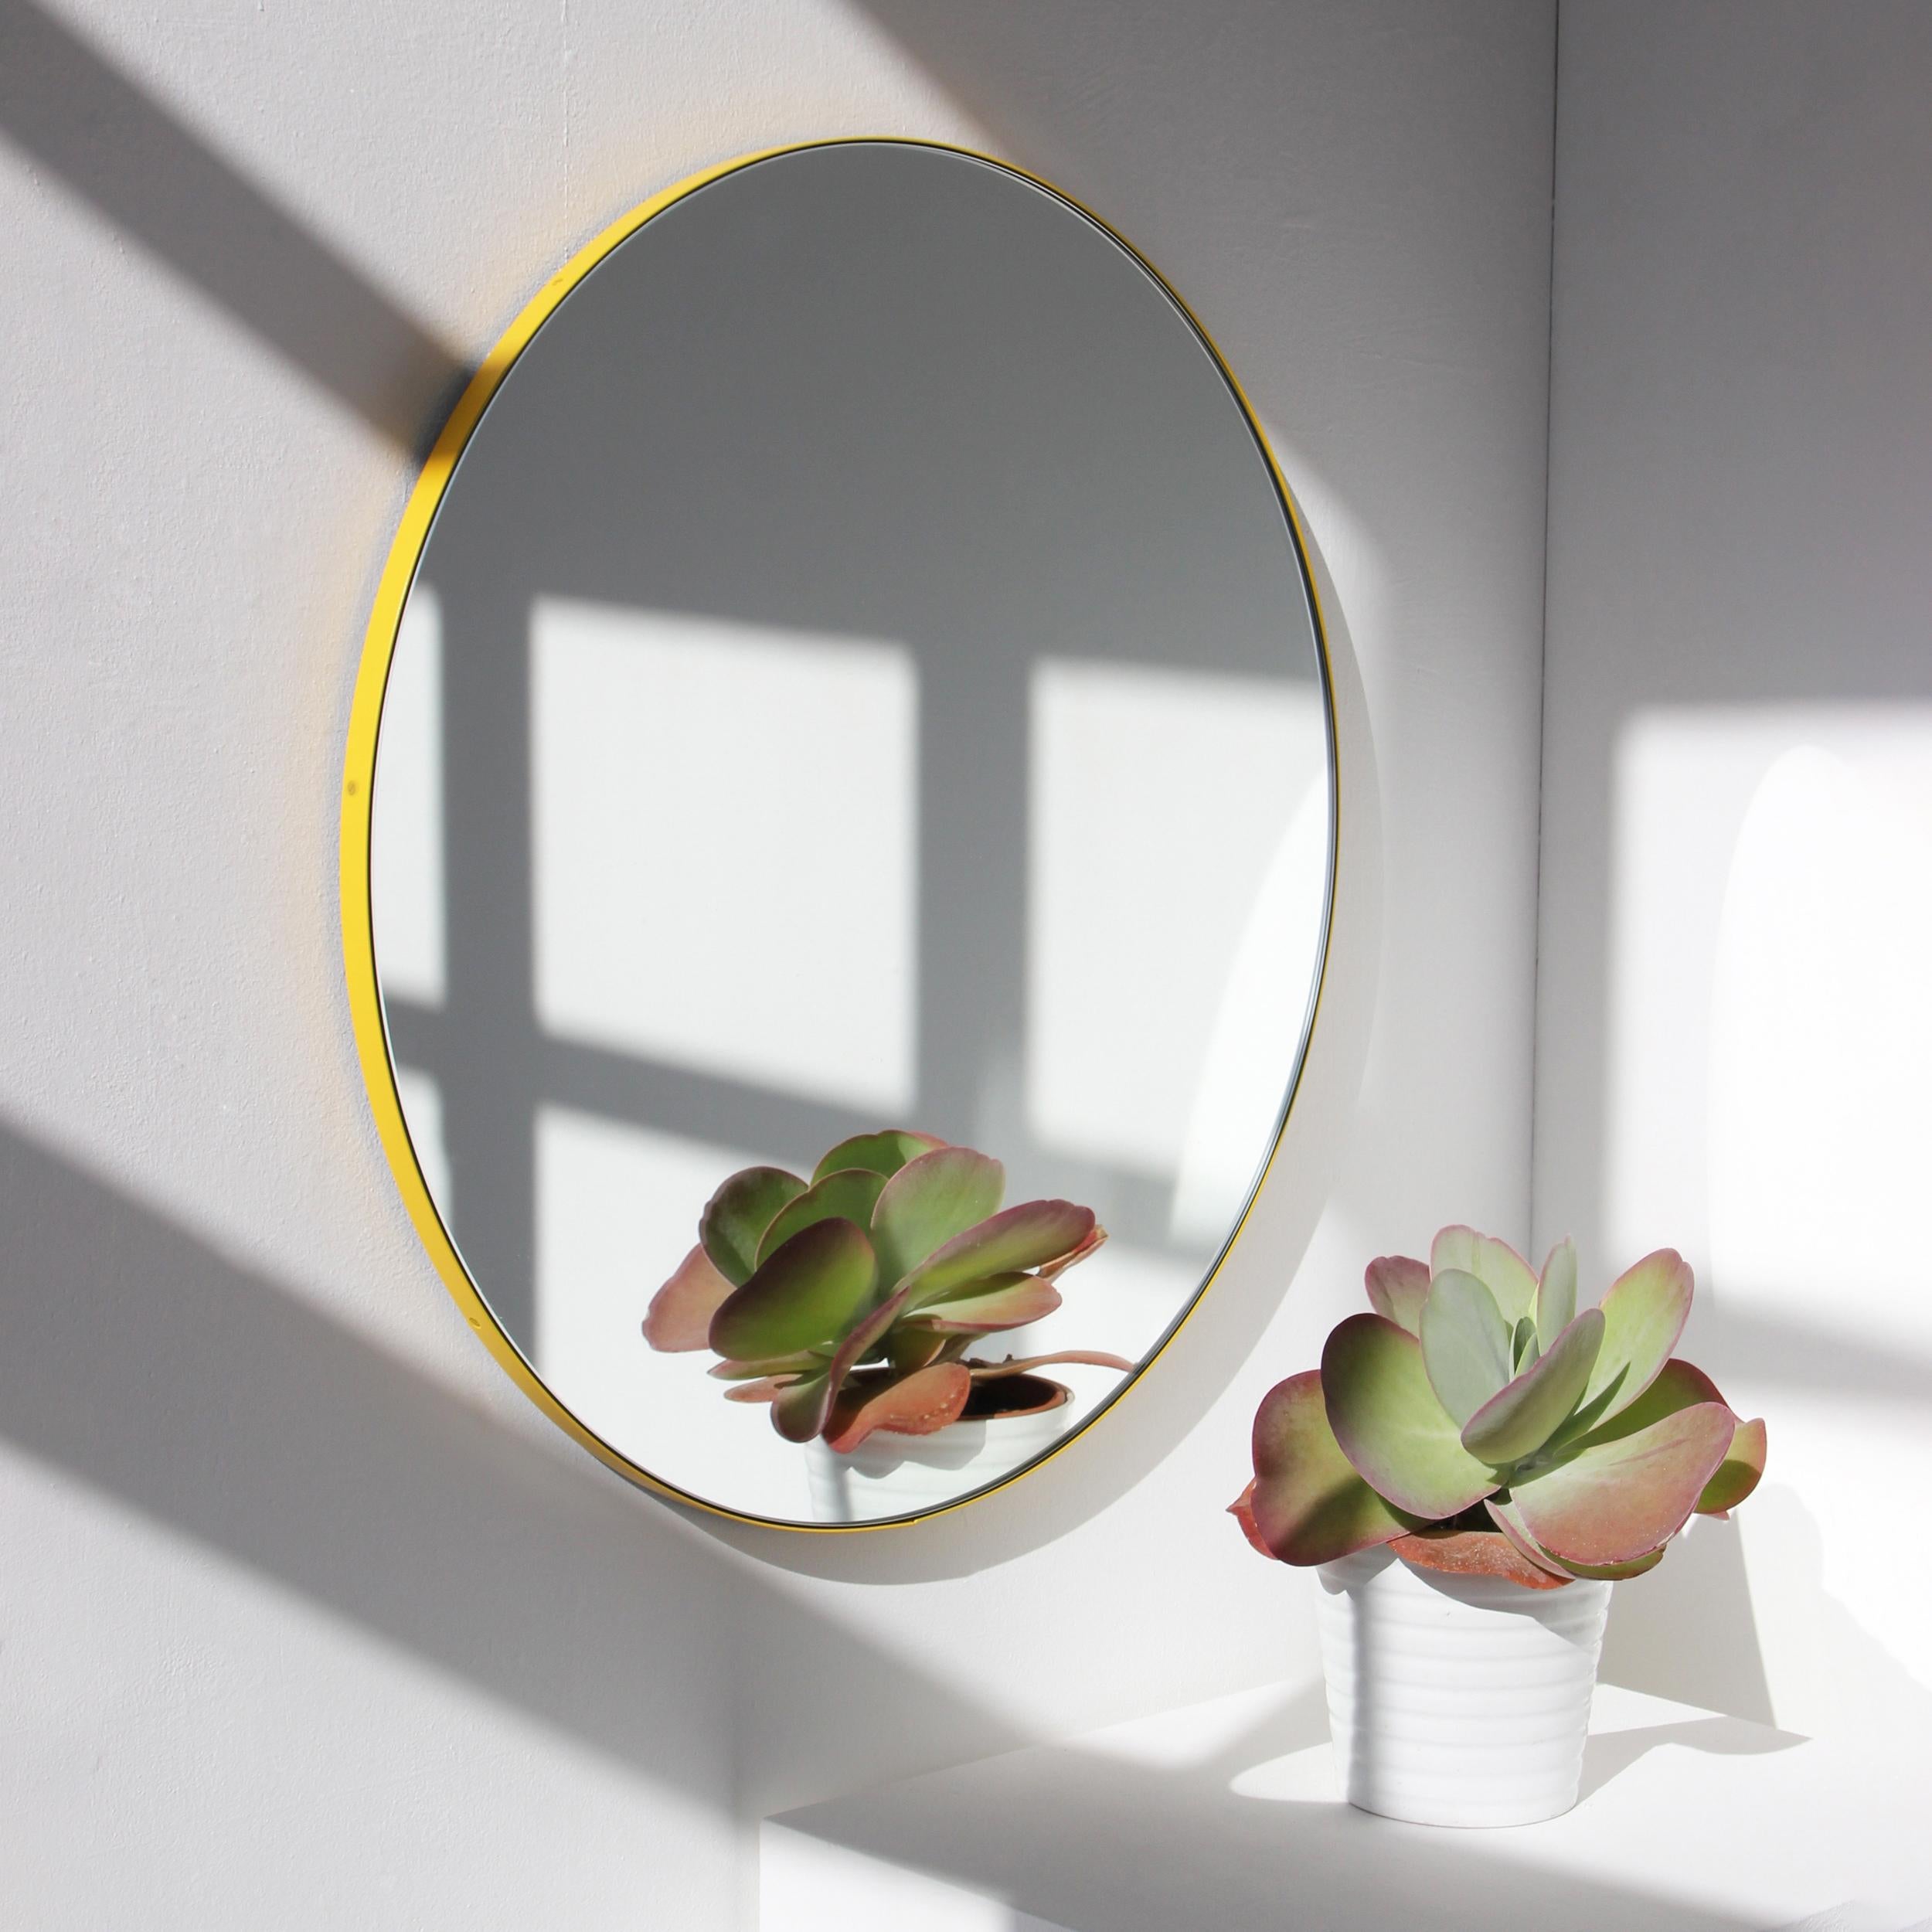 Orbis Round Modern Mirror with Yellow Frame, Small In Distressed Condition For Sale In London, GB